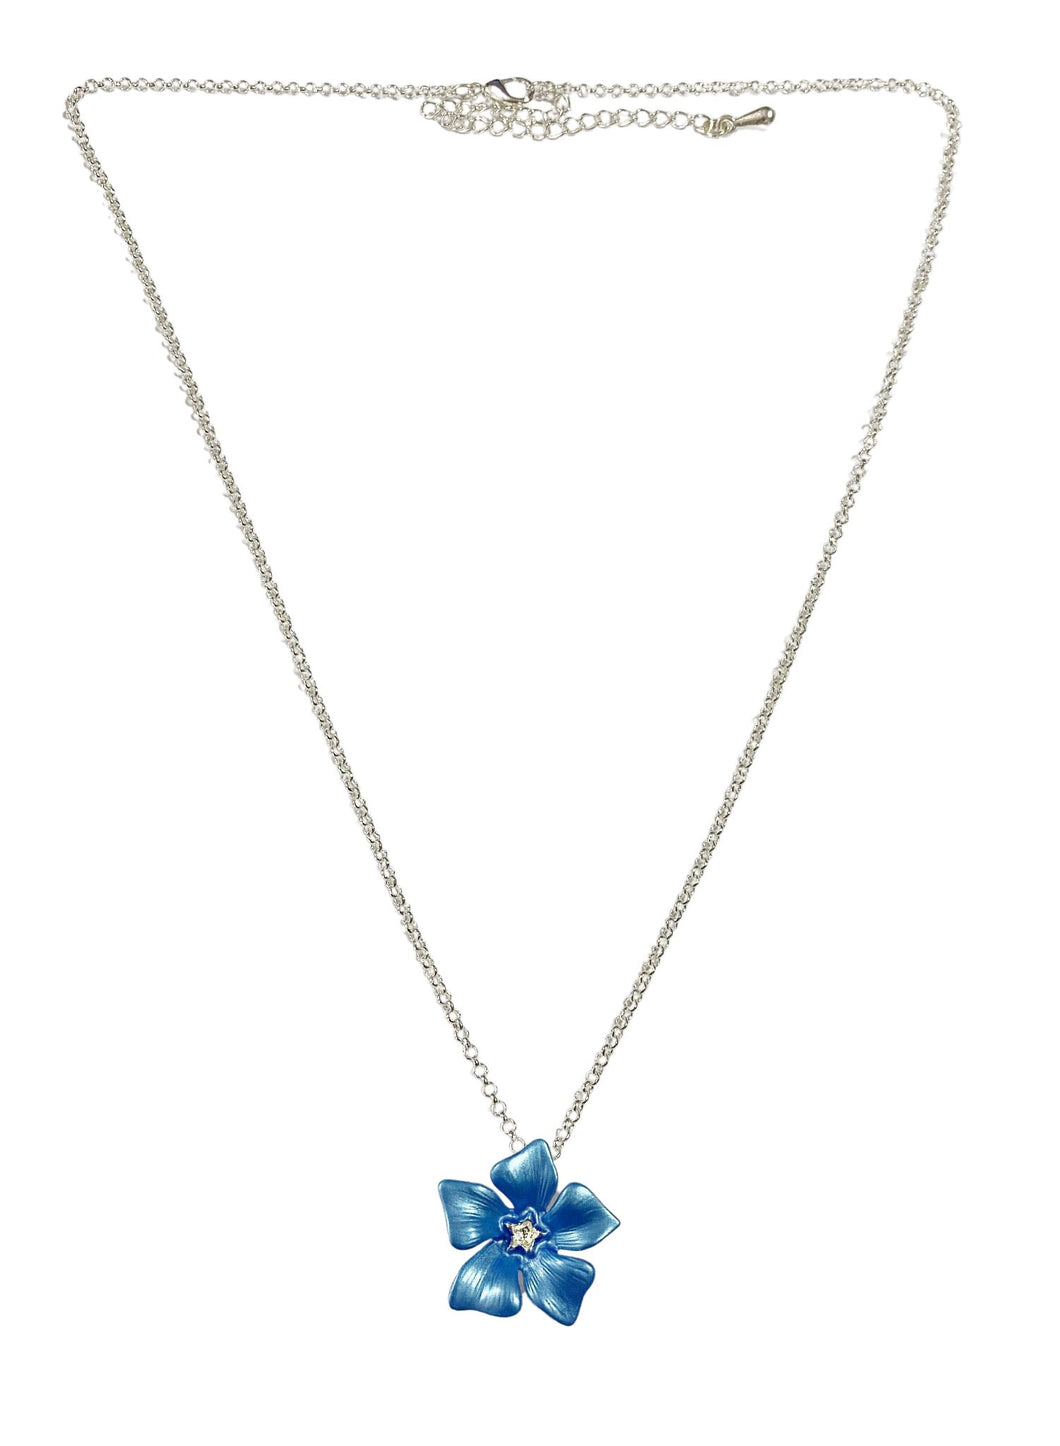 Blue periwinkle pendant and chain. Clearance sale